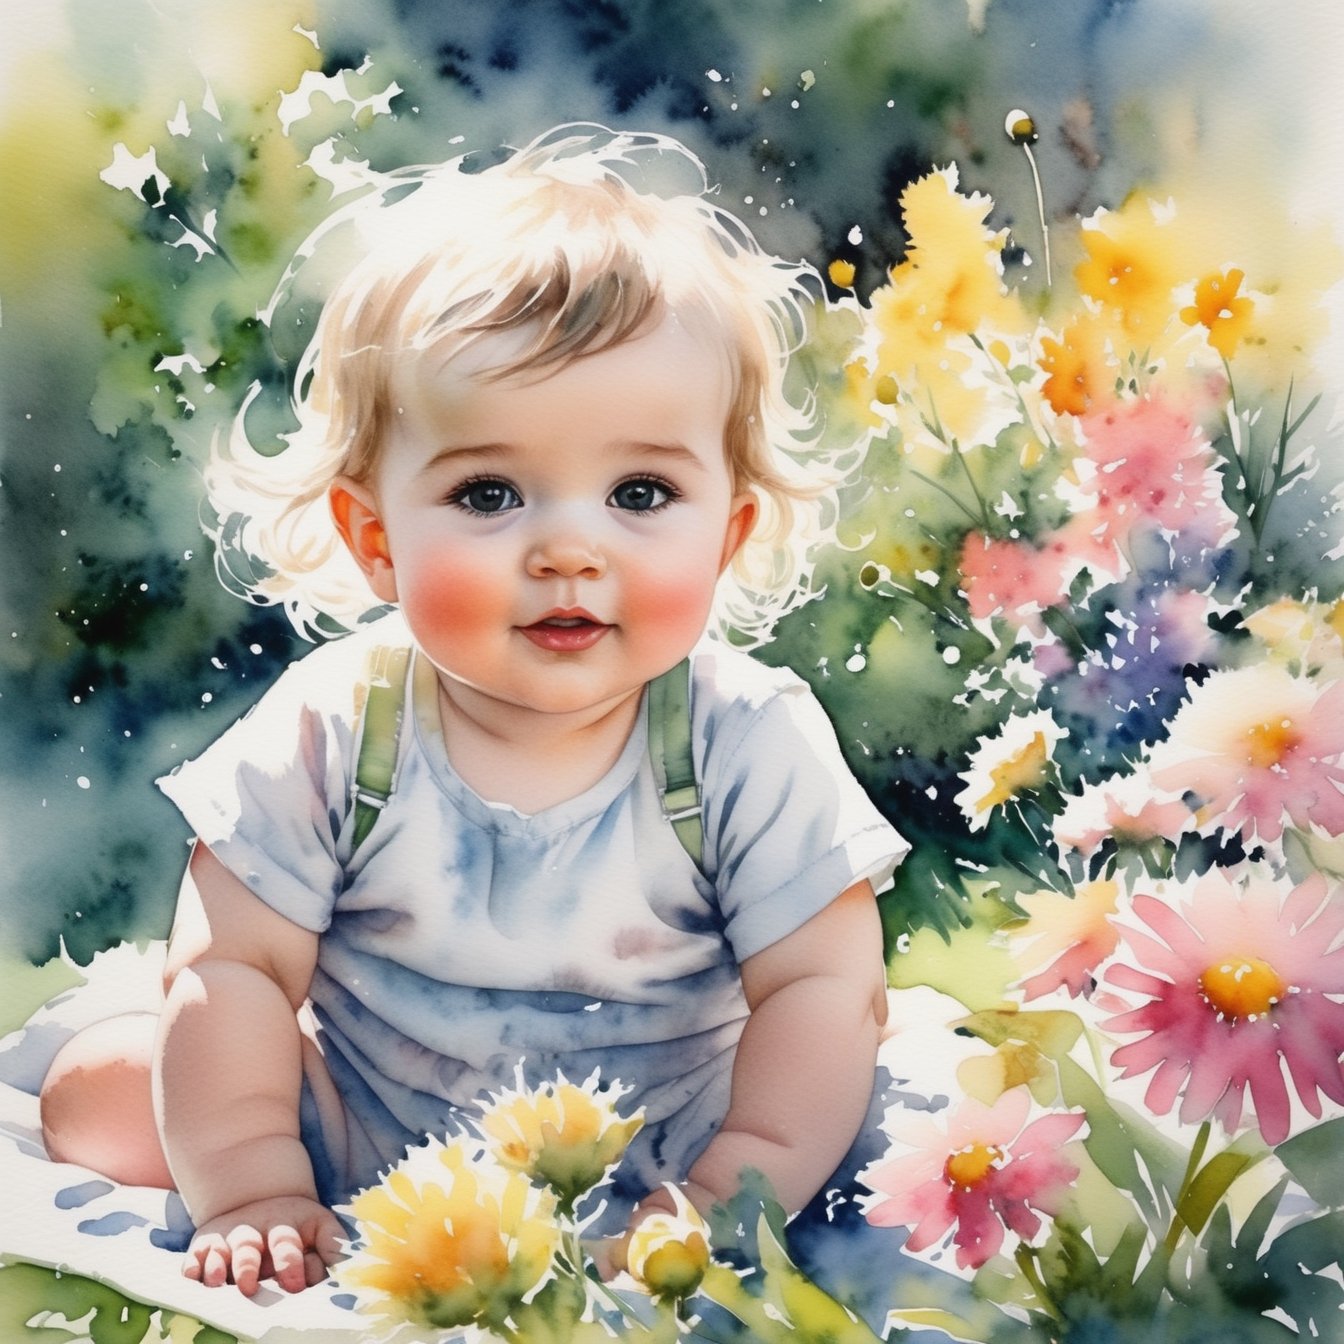 watercolor wash, wet on wet, watercolor, adorable cute baby with flowers in hair sitting in a gorgerous garden with many flowers foreground and background, soft colors and sun, hyper detailed, realistic, cinematic